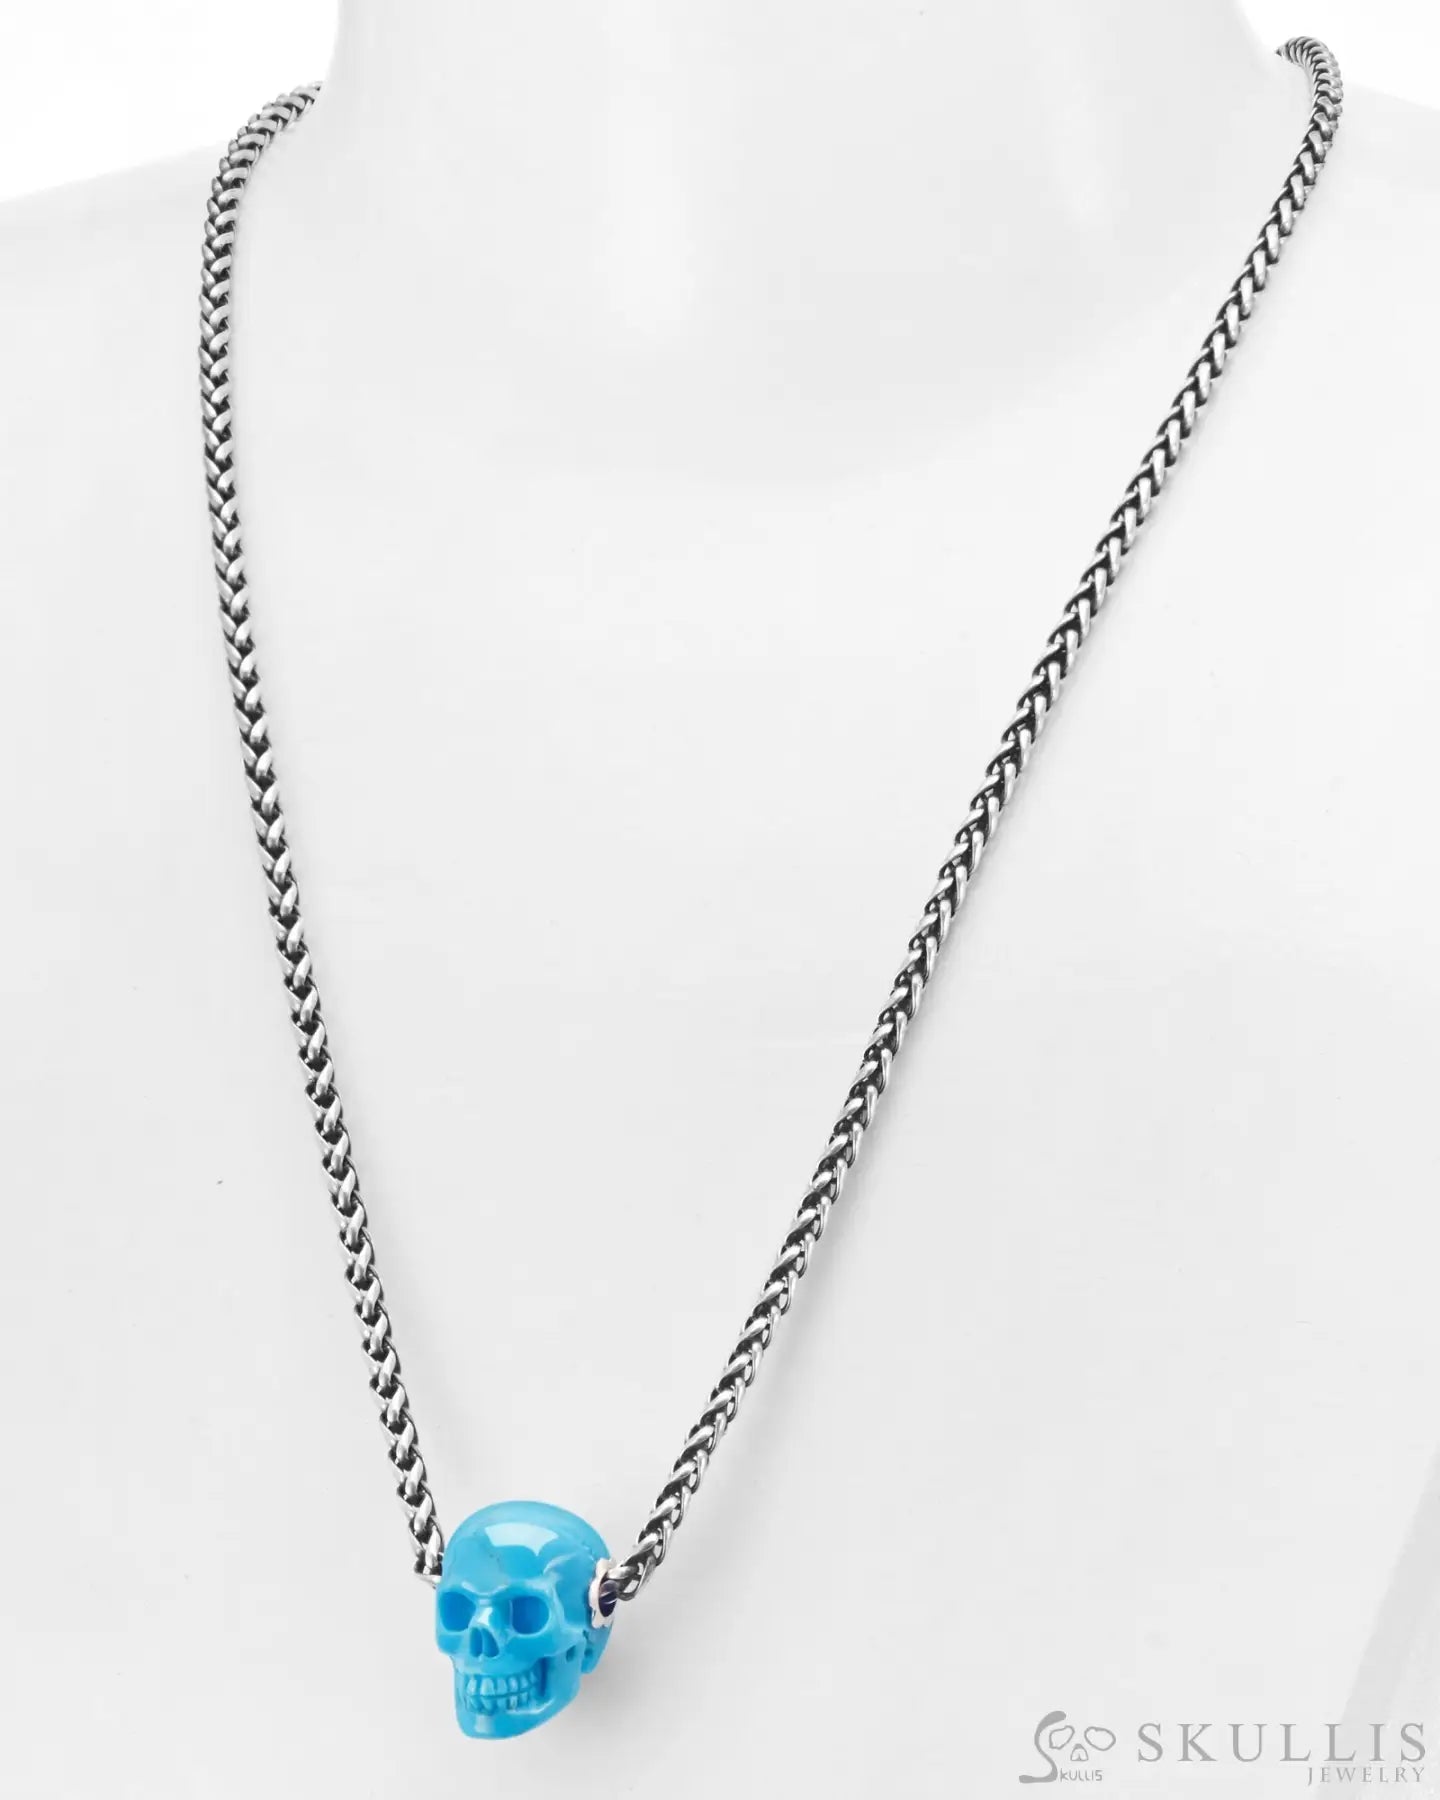 Gem Skull Pendant Necklace Of American Turquoise Carved Pendants